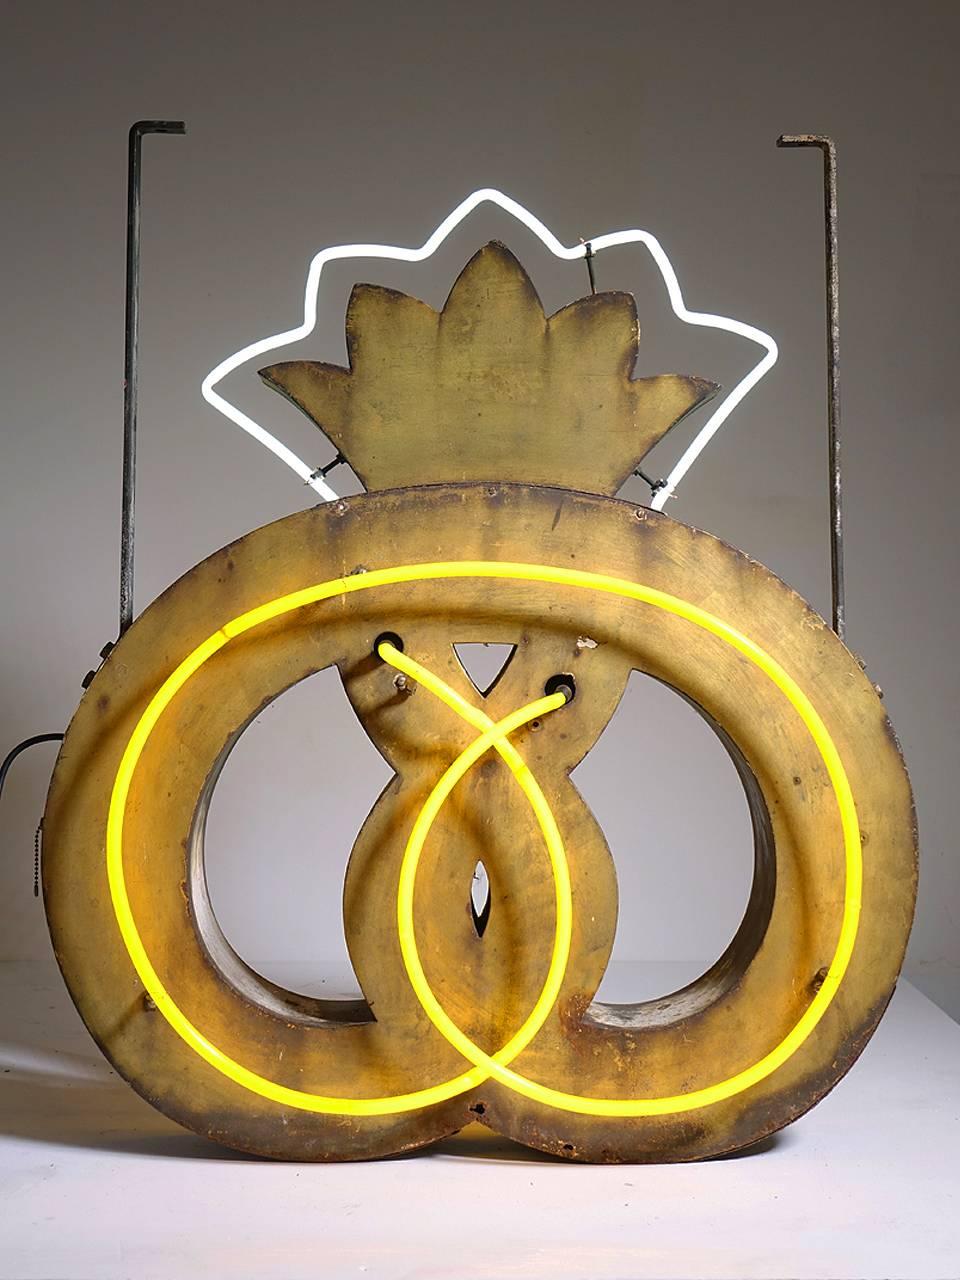 When we first found this neon sign our restorer was excited to work on it. He believes that the sign was a hand-made and one-off being produced by a skilled metal fabricator. It was most likely used outside a small shop in Denmark. This is a